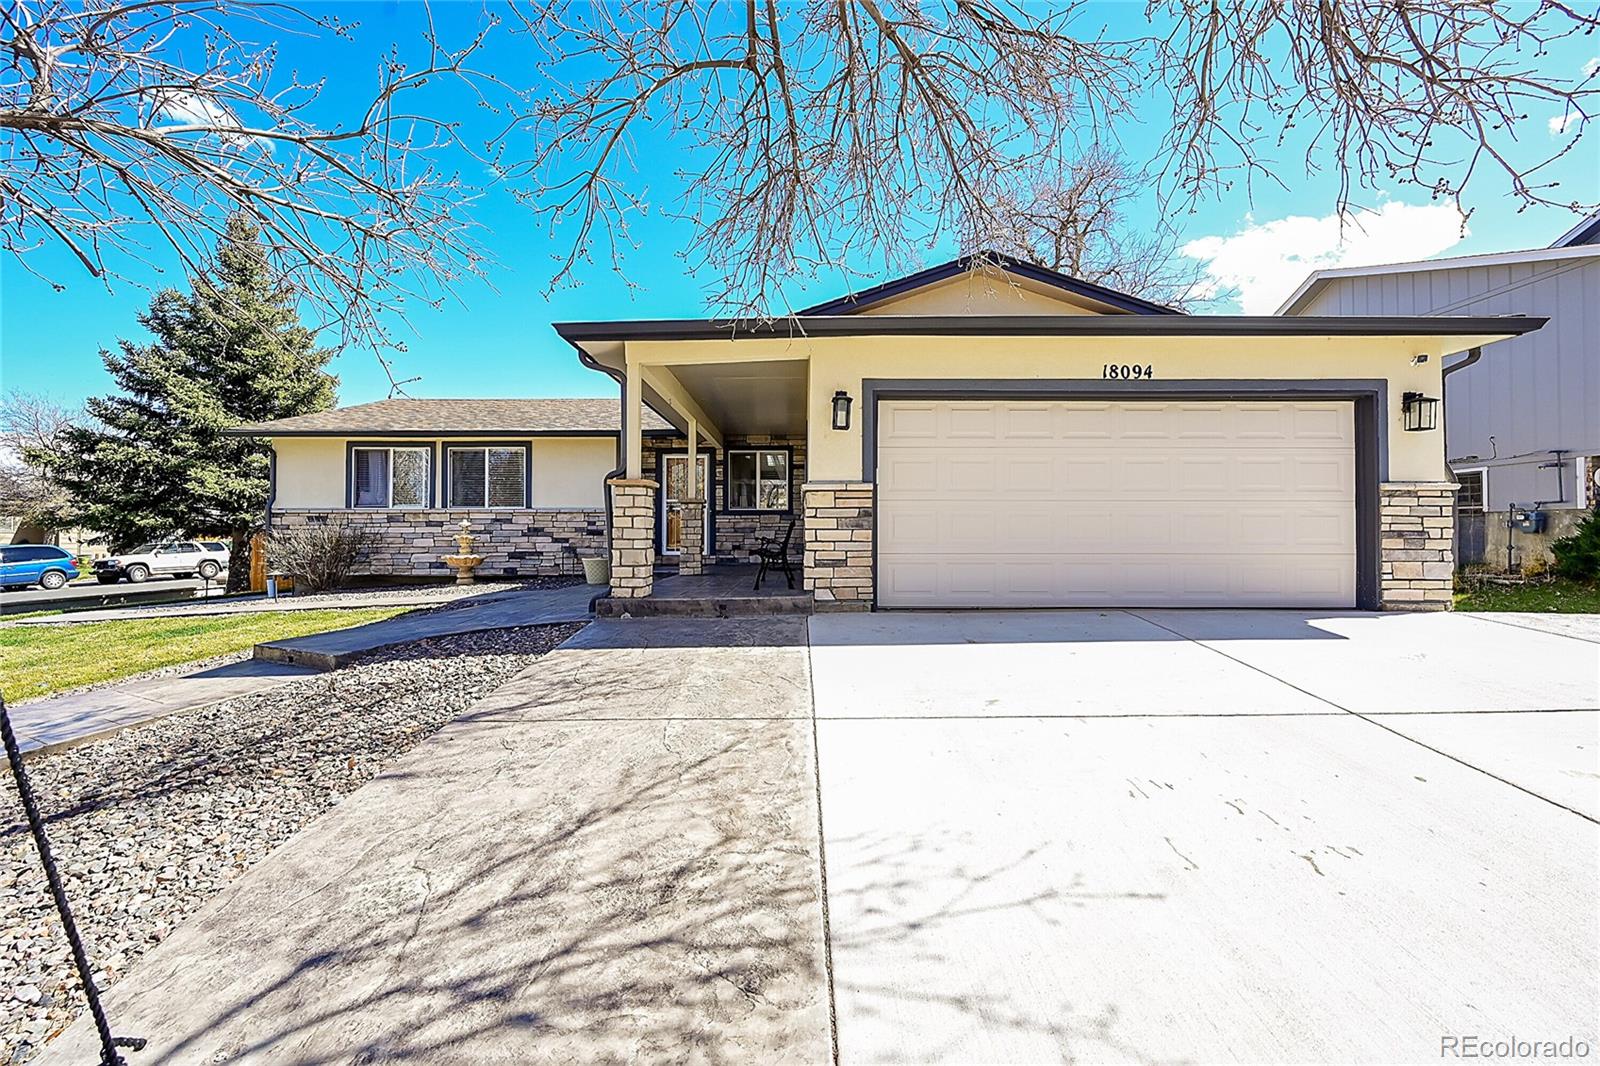 18094 E Ford Place, aurora MLS: 2481891 Beds: 5 Baths: 2 Price: $549,000